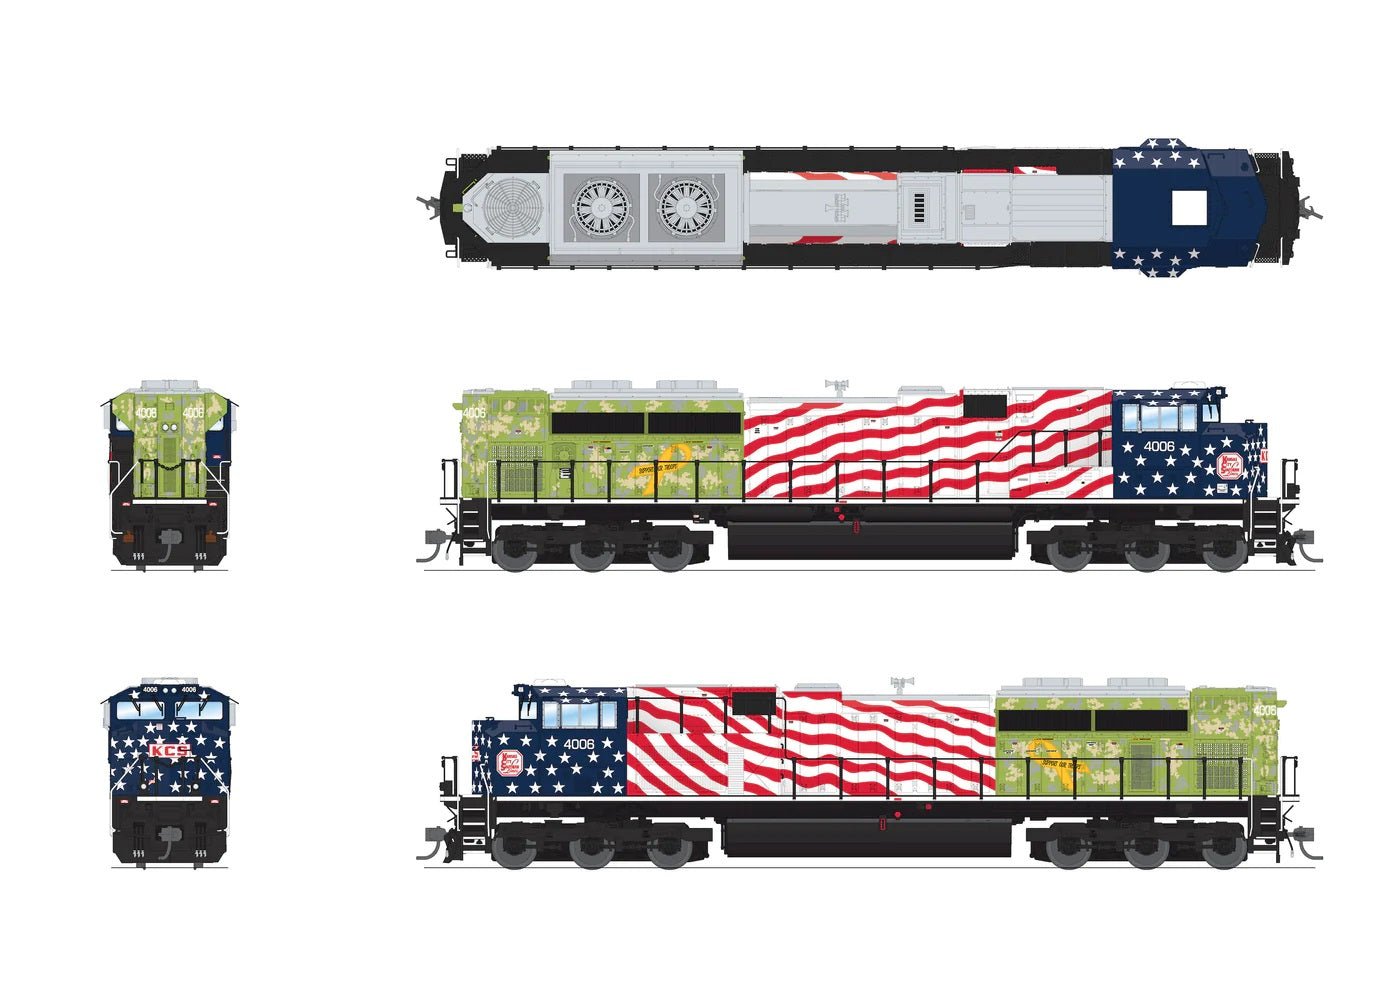 Broadway Limited EMD SD70ACe KCS #4006 “Support Our Troops” Paragon 4 Sound/DC/DCC w/Smoke, HO Scale - Pre - Order